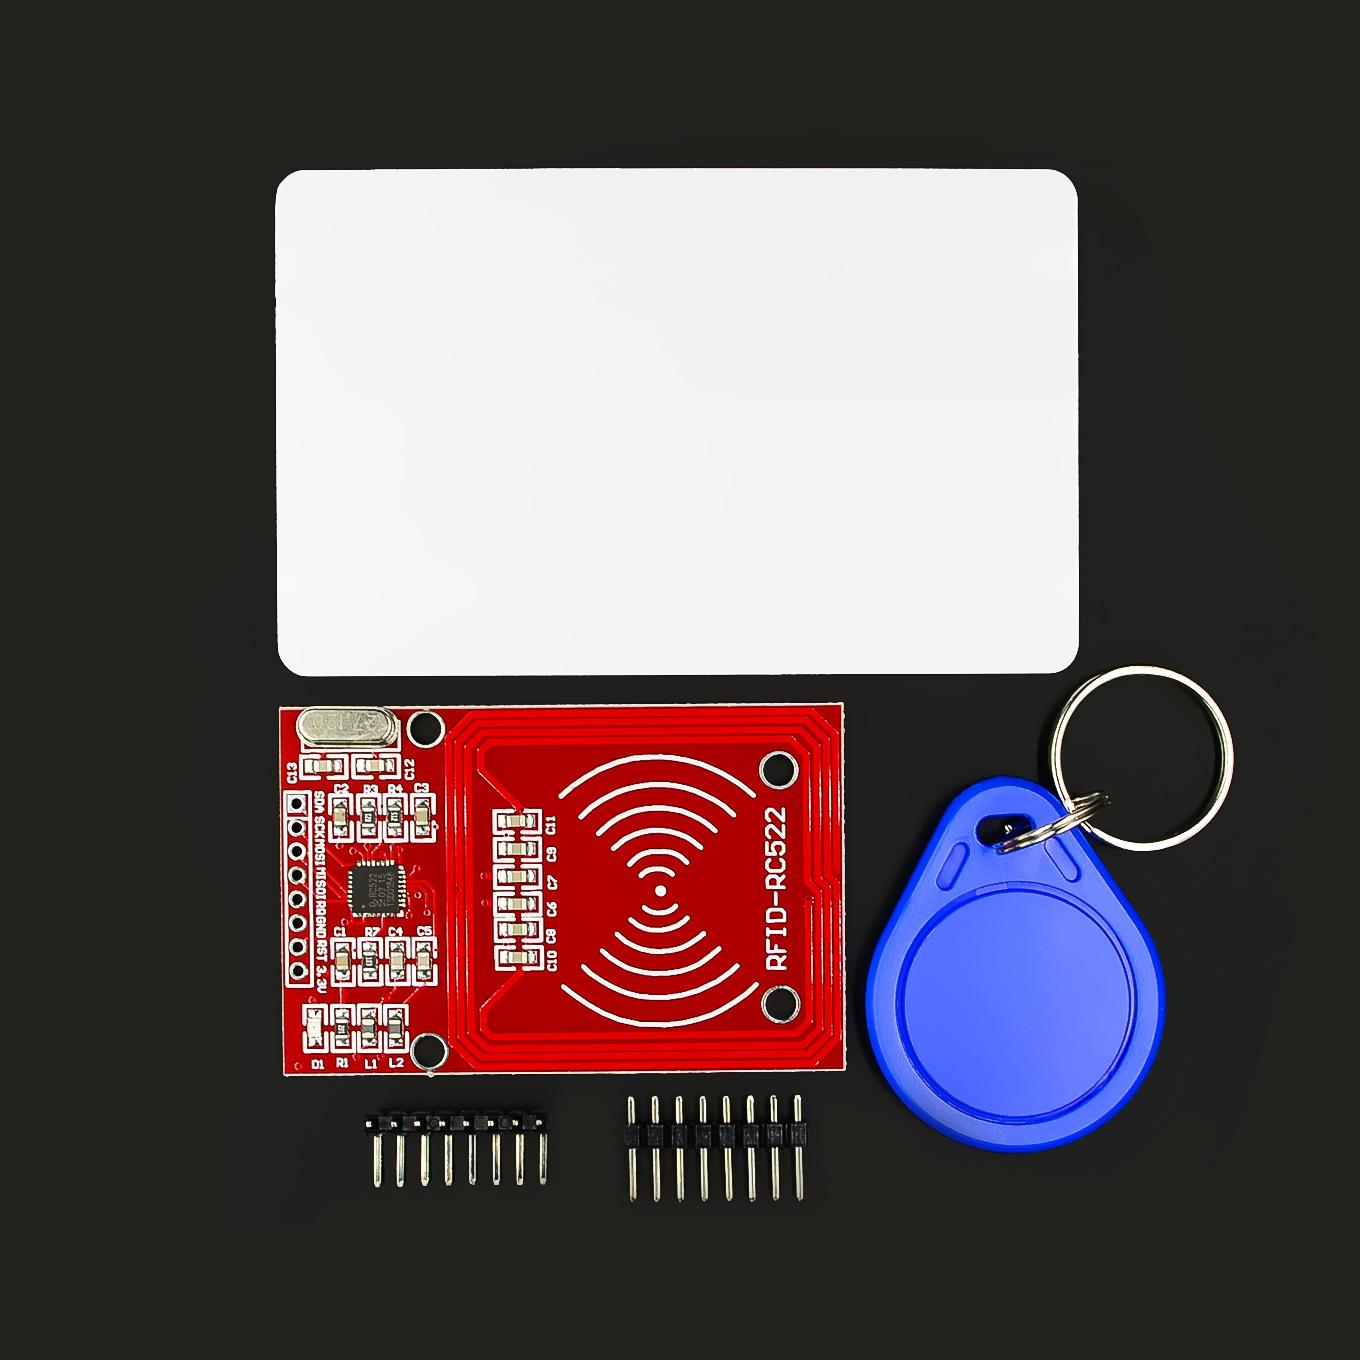 MFRC-522 RC522 RFID RF IC card inductive module with free S50 Fudan card key chain wholesale red